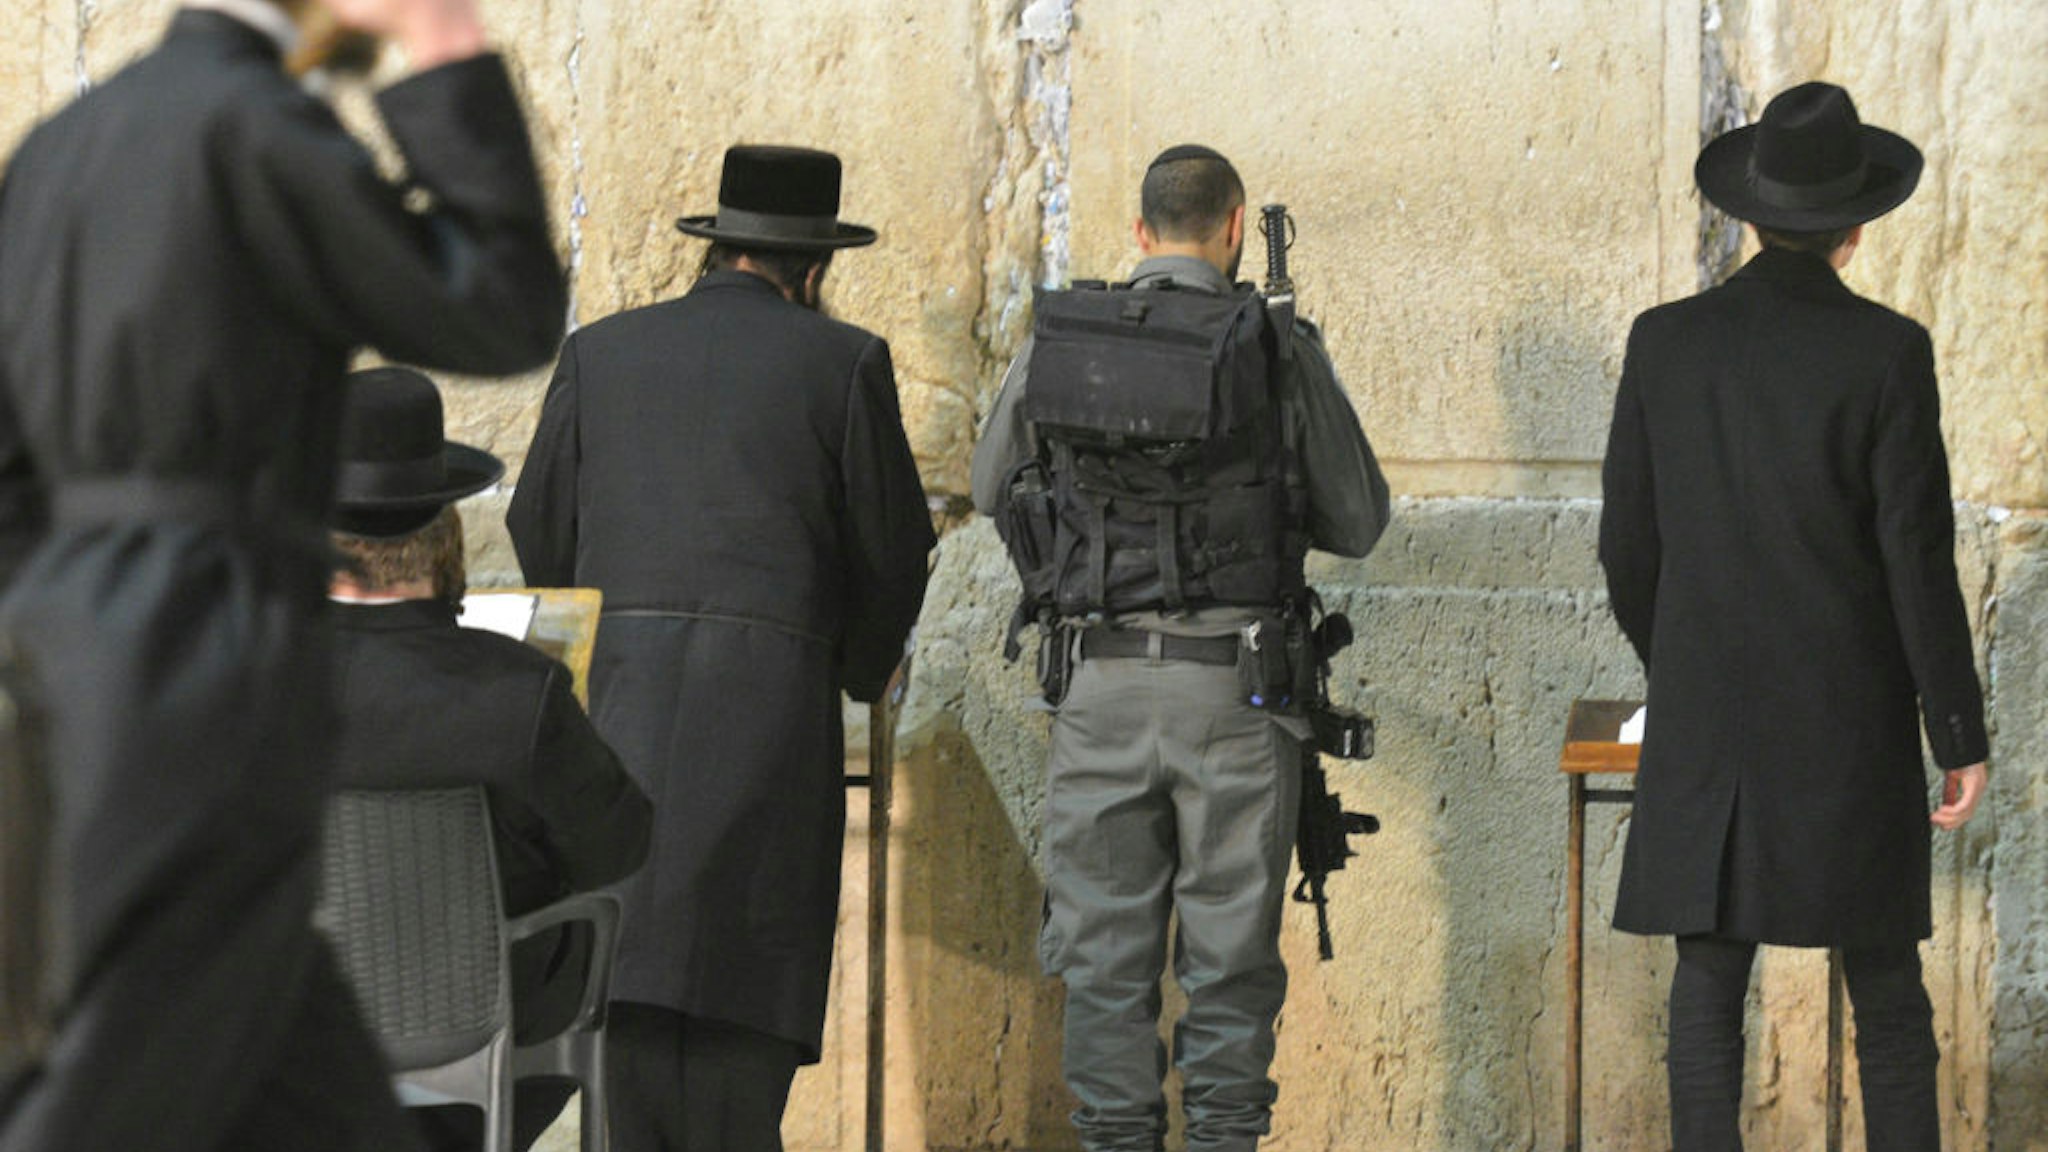 Jews praying at the Western Wall inside the Old City in Jerusalem. Wednesday, 14 March 2018, in Jerusalem, Israel.